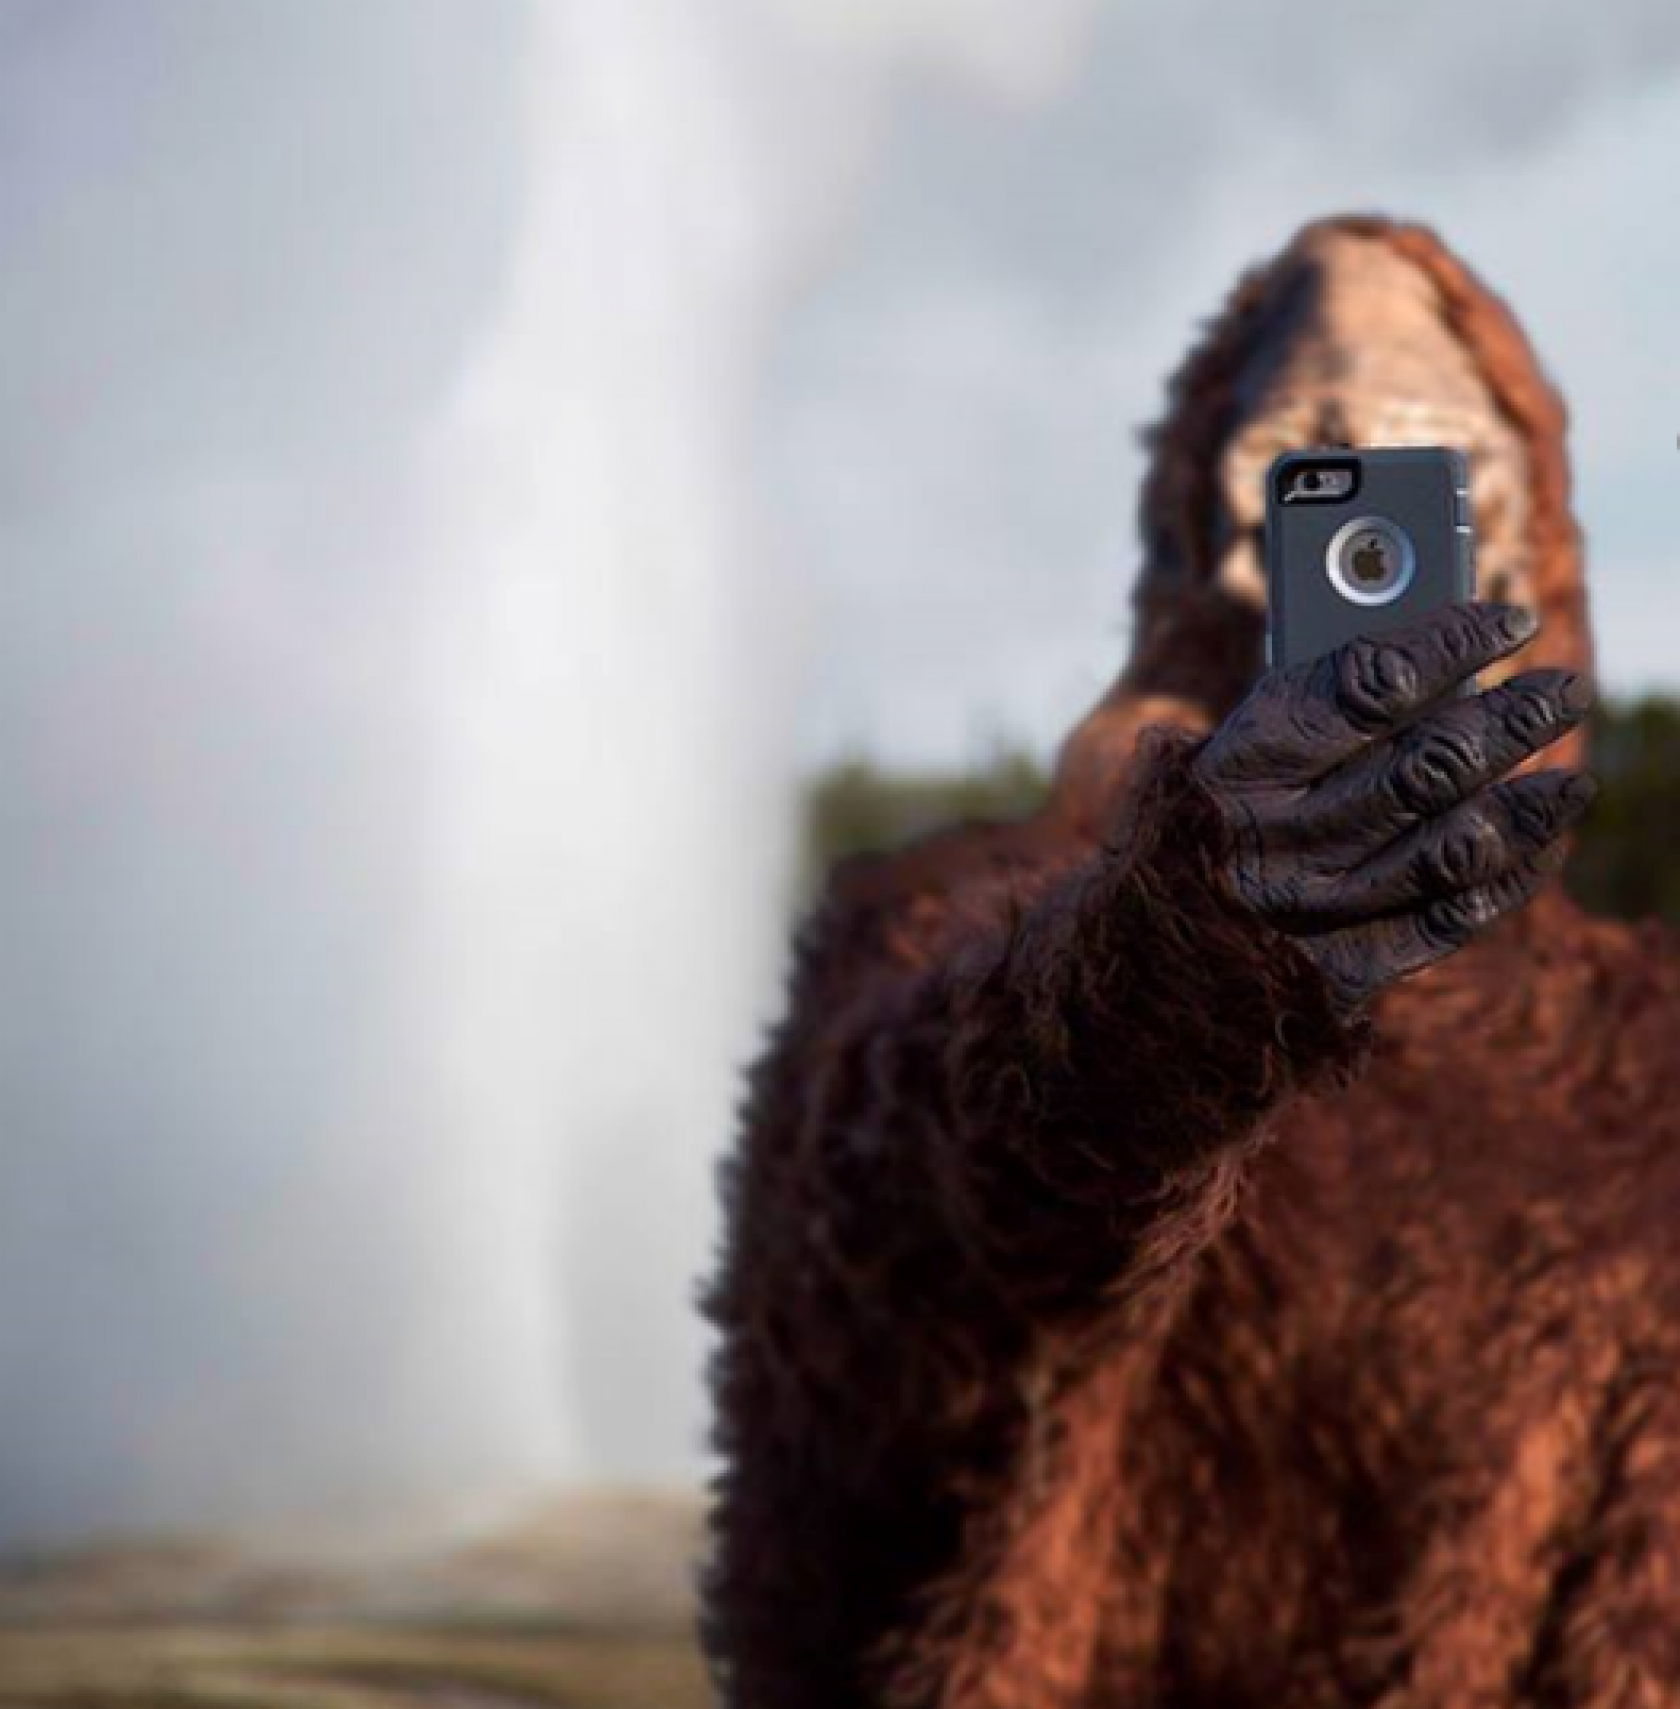 A funny image of bigfoot with a phone